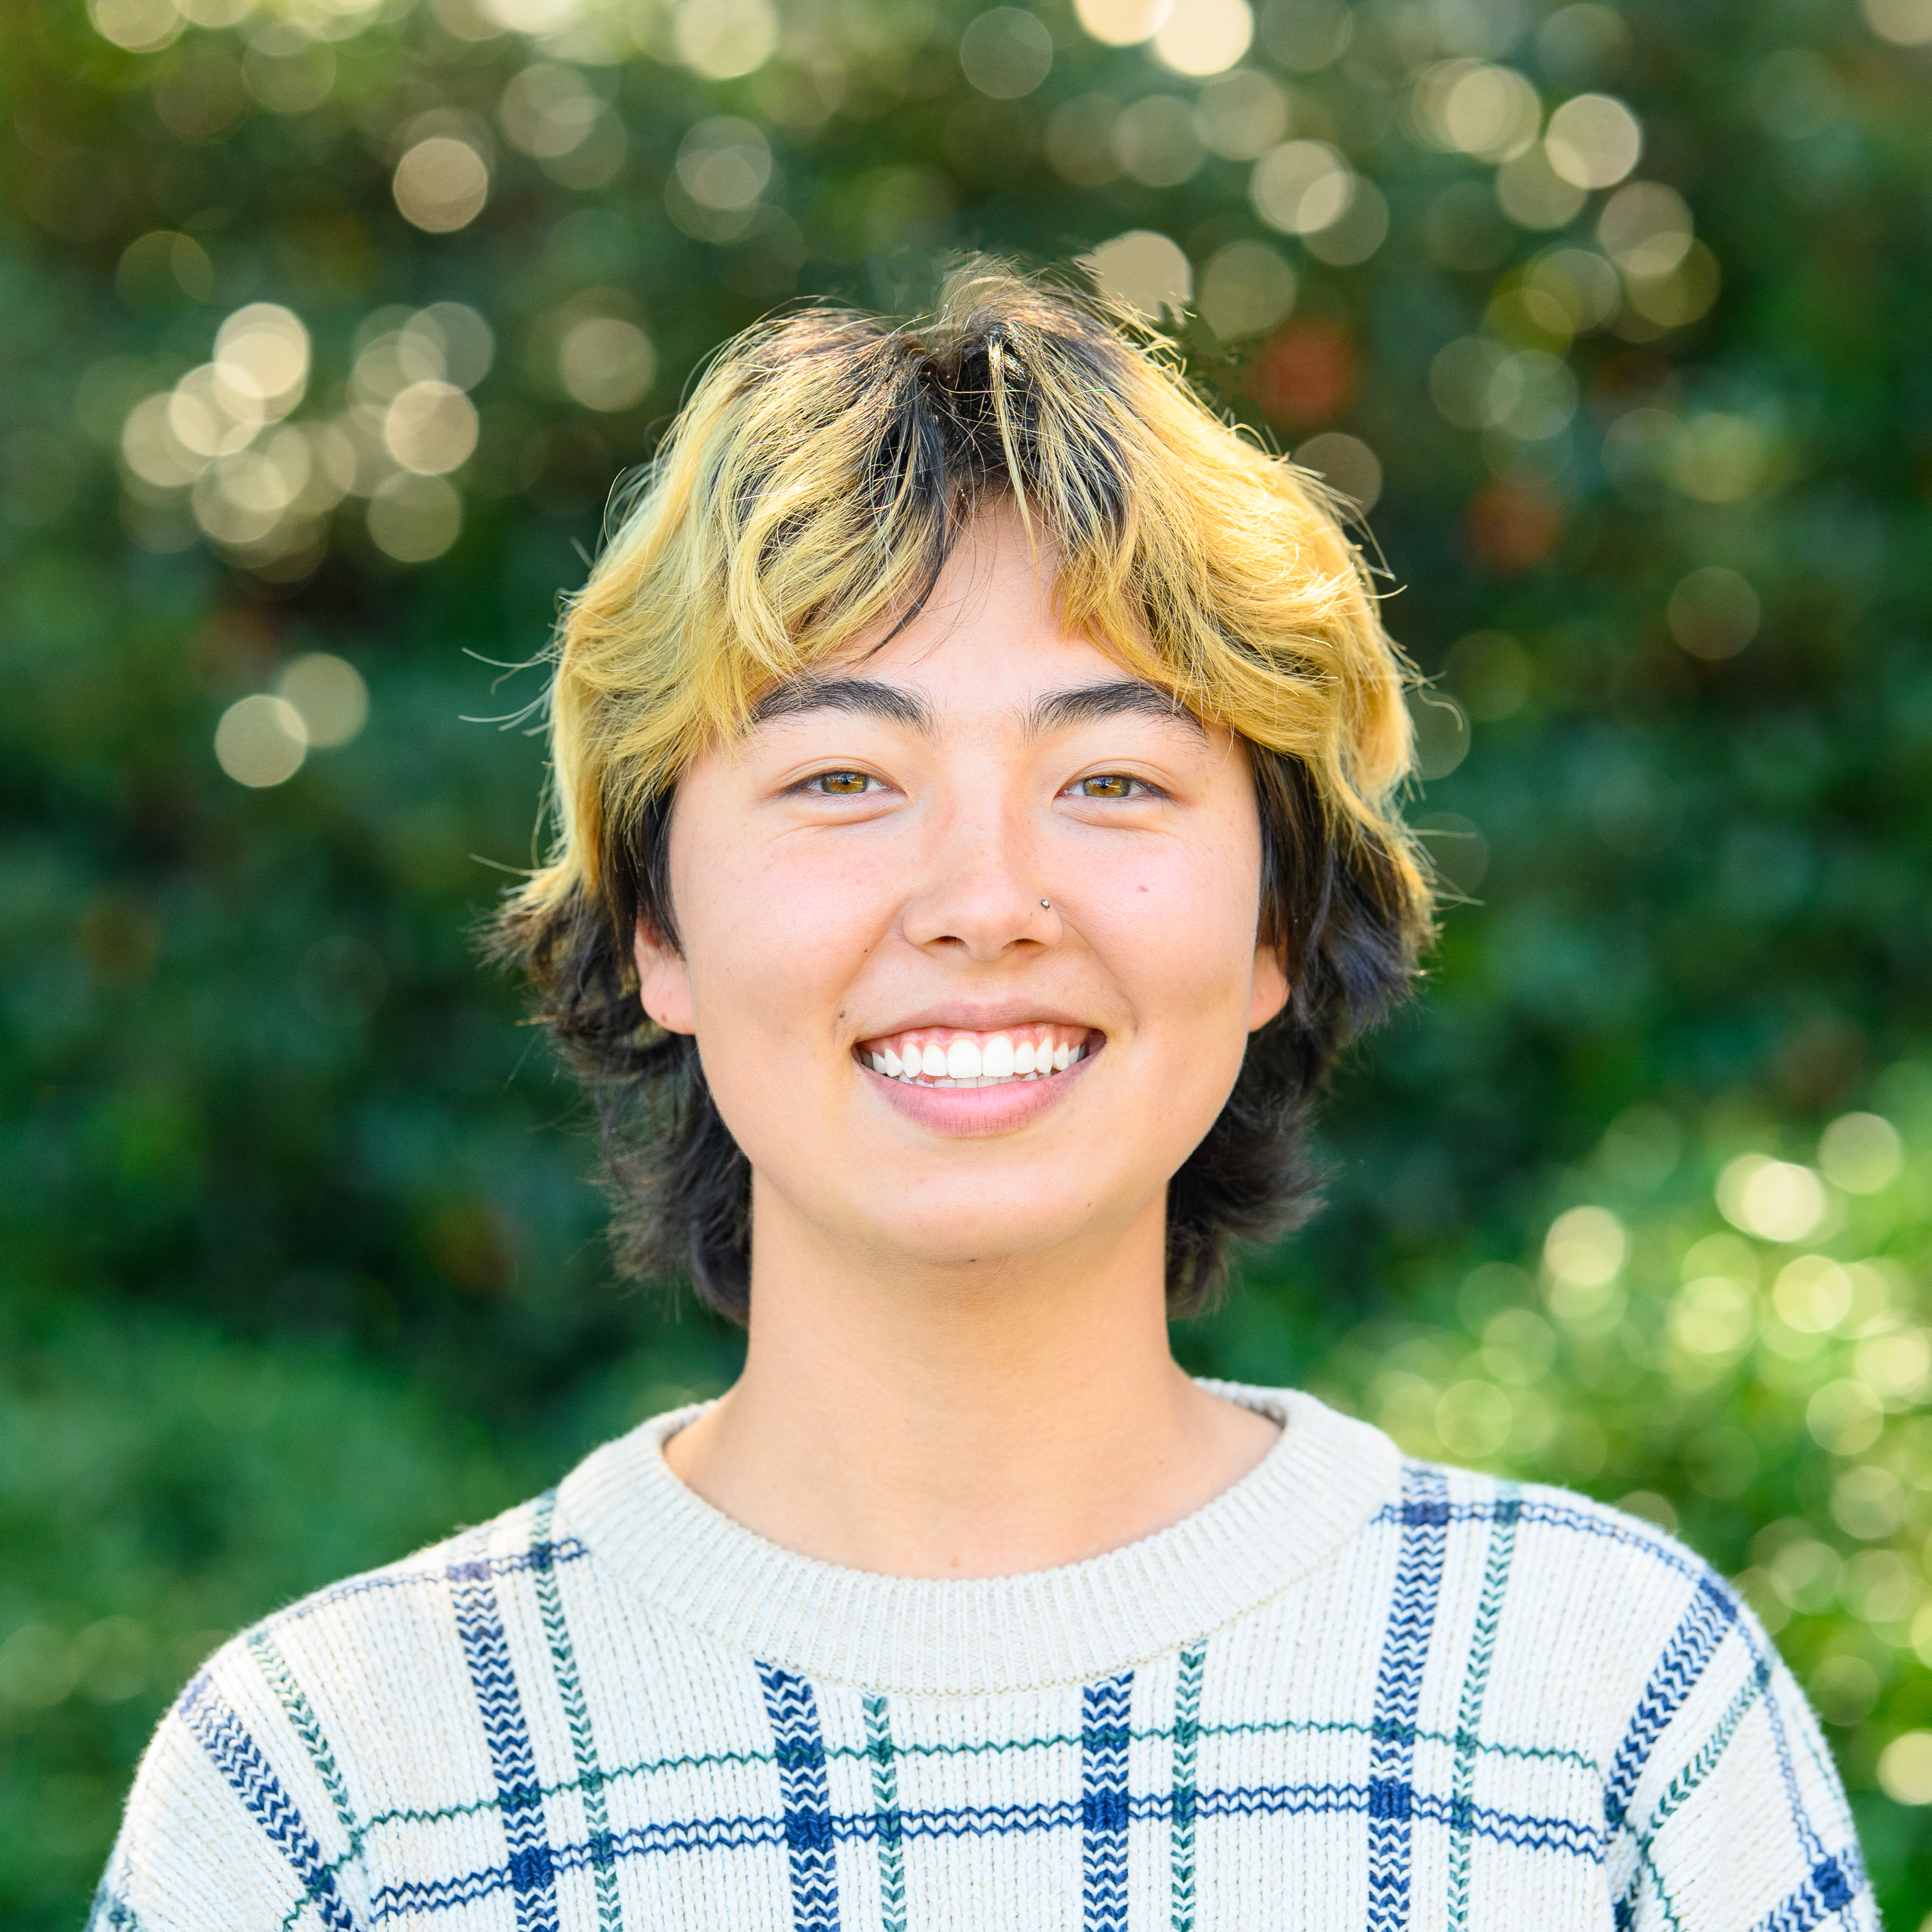 Photo of Sun, a Korean-American person with cropped black hair with gold highlights. They are smiling outside in front of greenery.